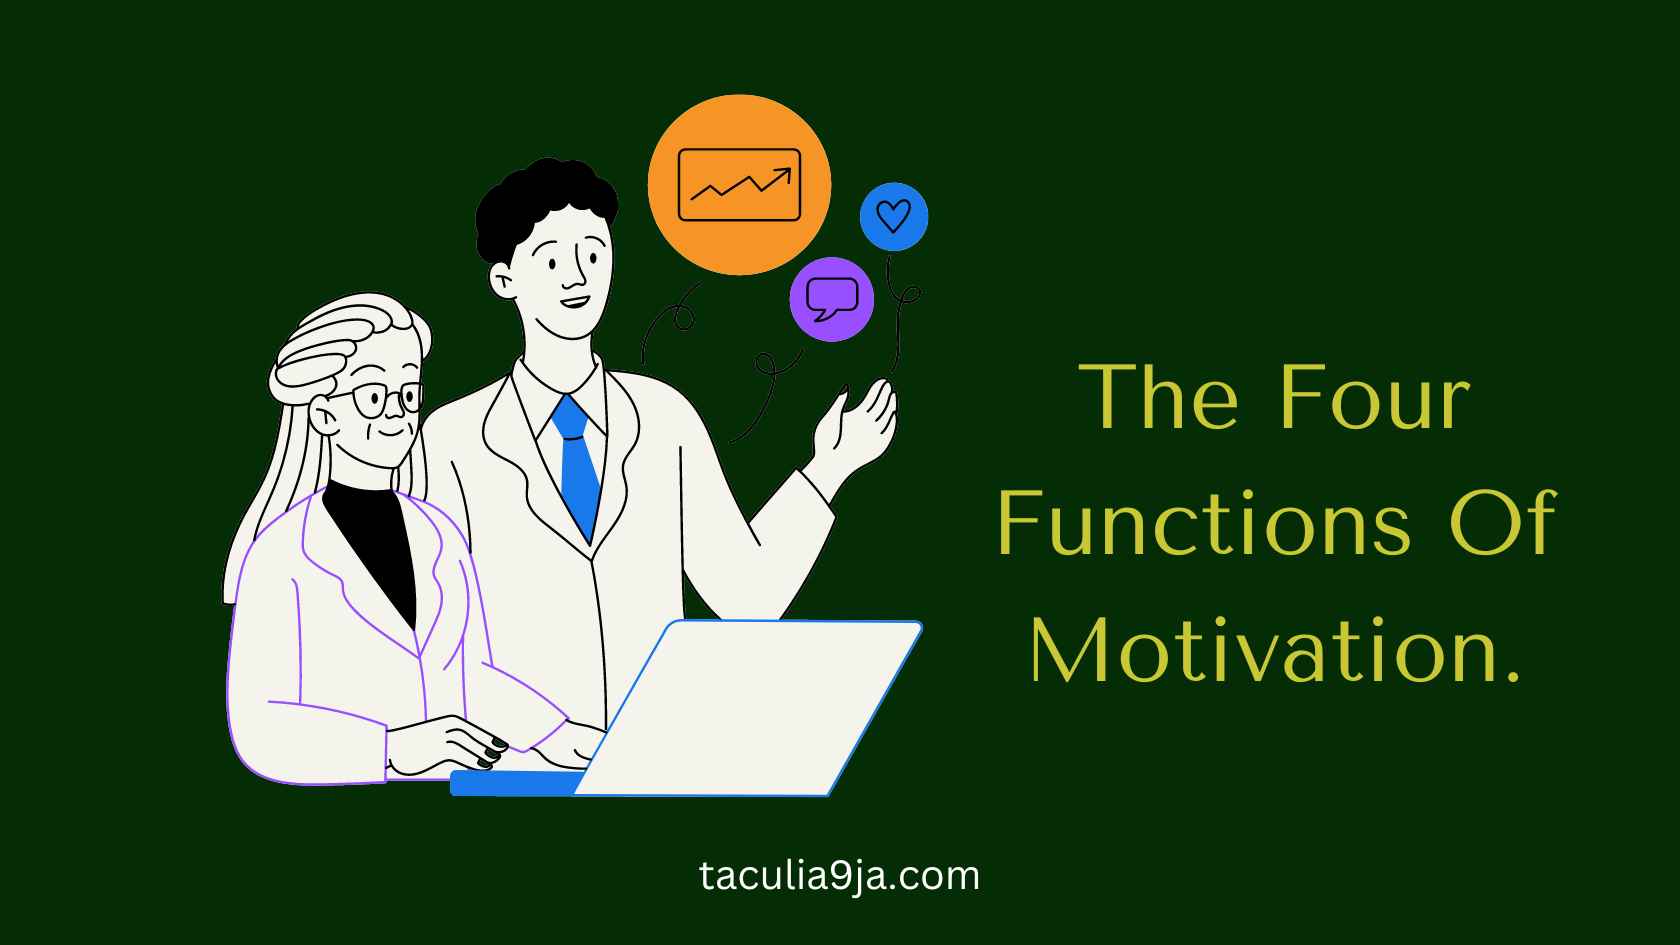 The Four Functions Of Motivation.